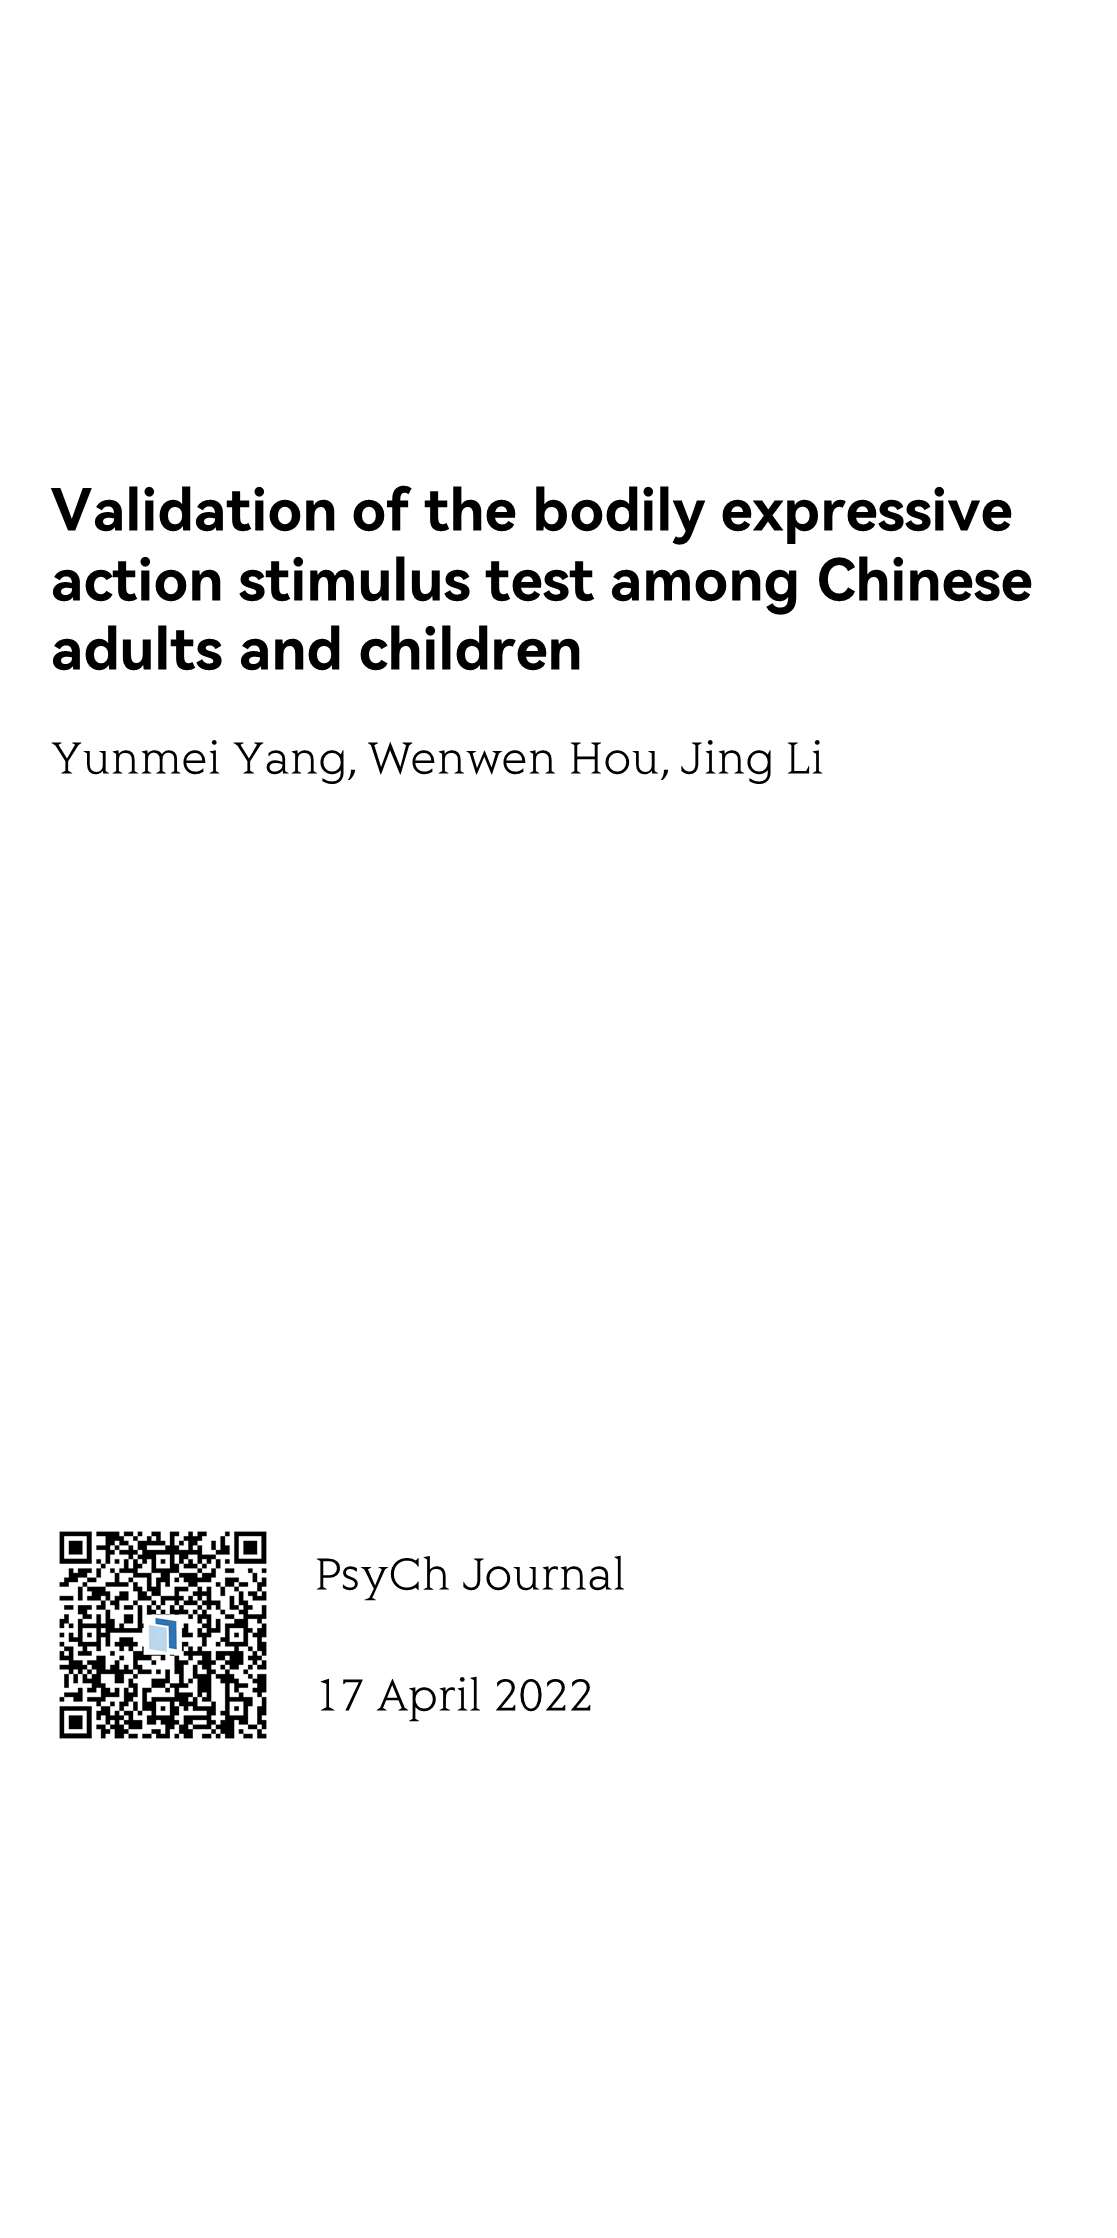 Validation of the bodily expressive action stimulus test among Chinese adults and children_1